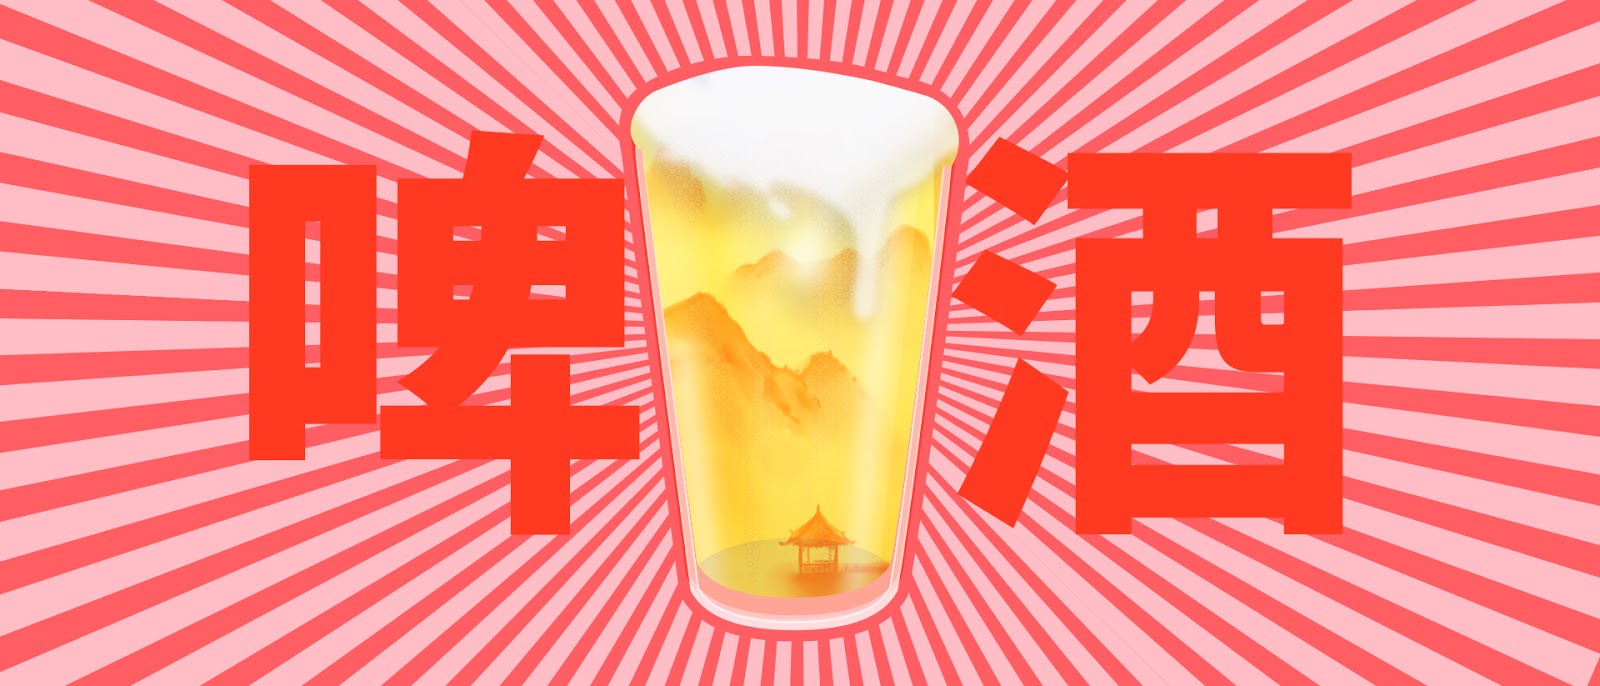 Craft beer in China, a glass of beer with a silhouette of Chinese landscape